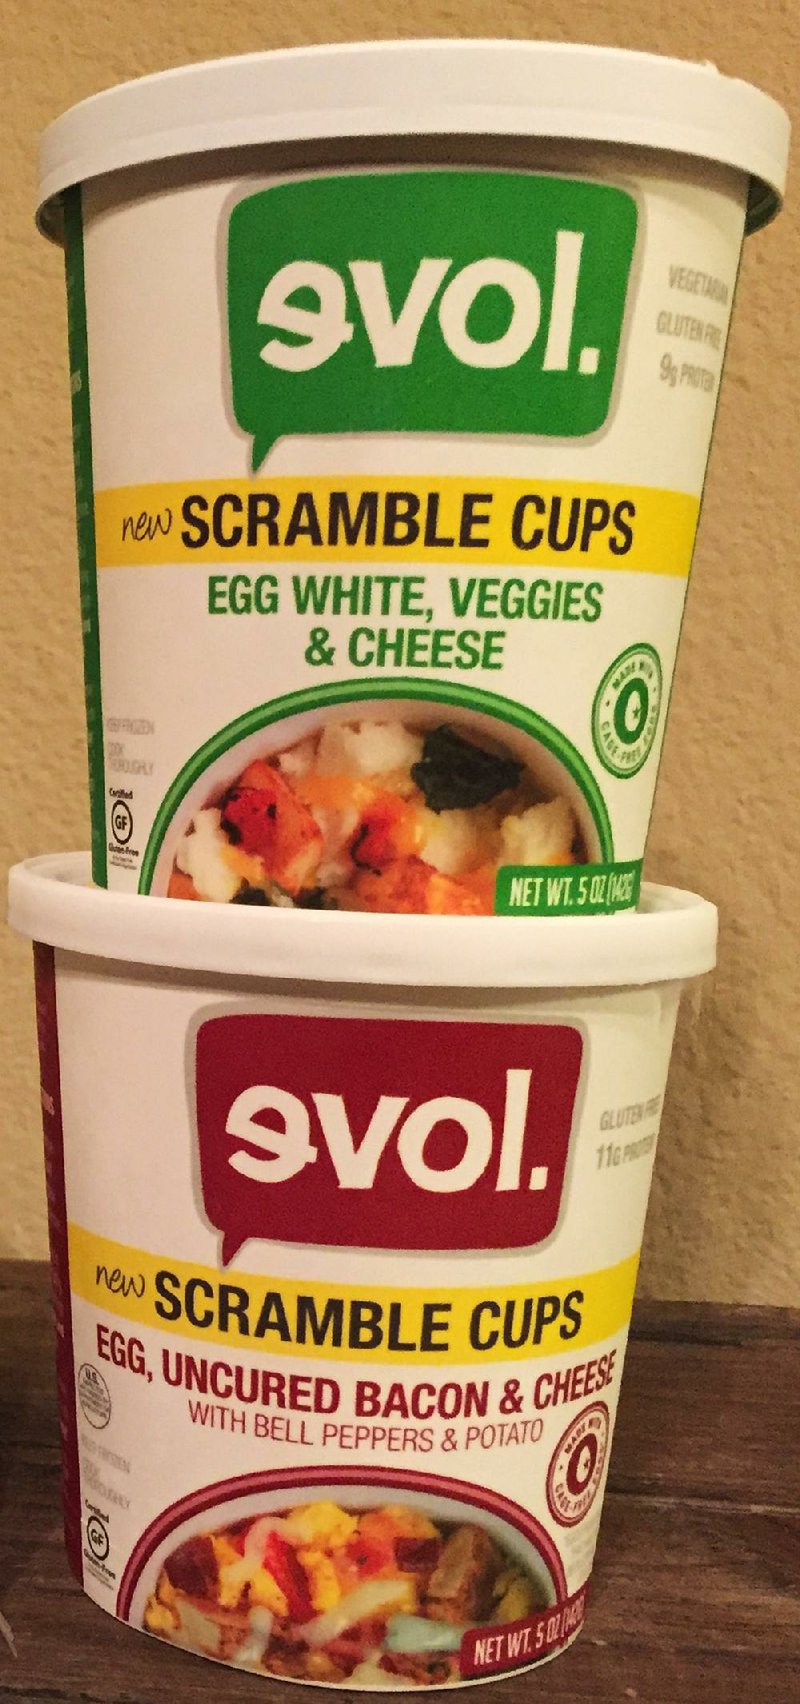 Evol Scramble Cups are shown in this picture. 